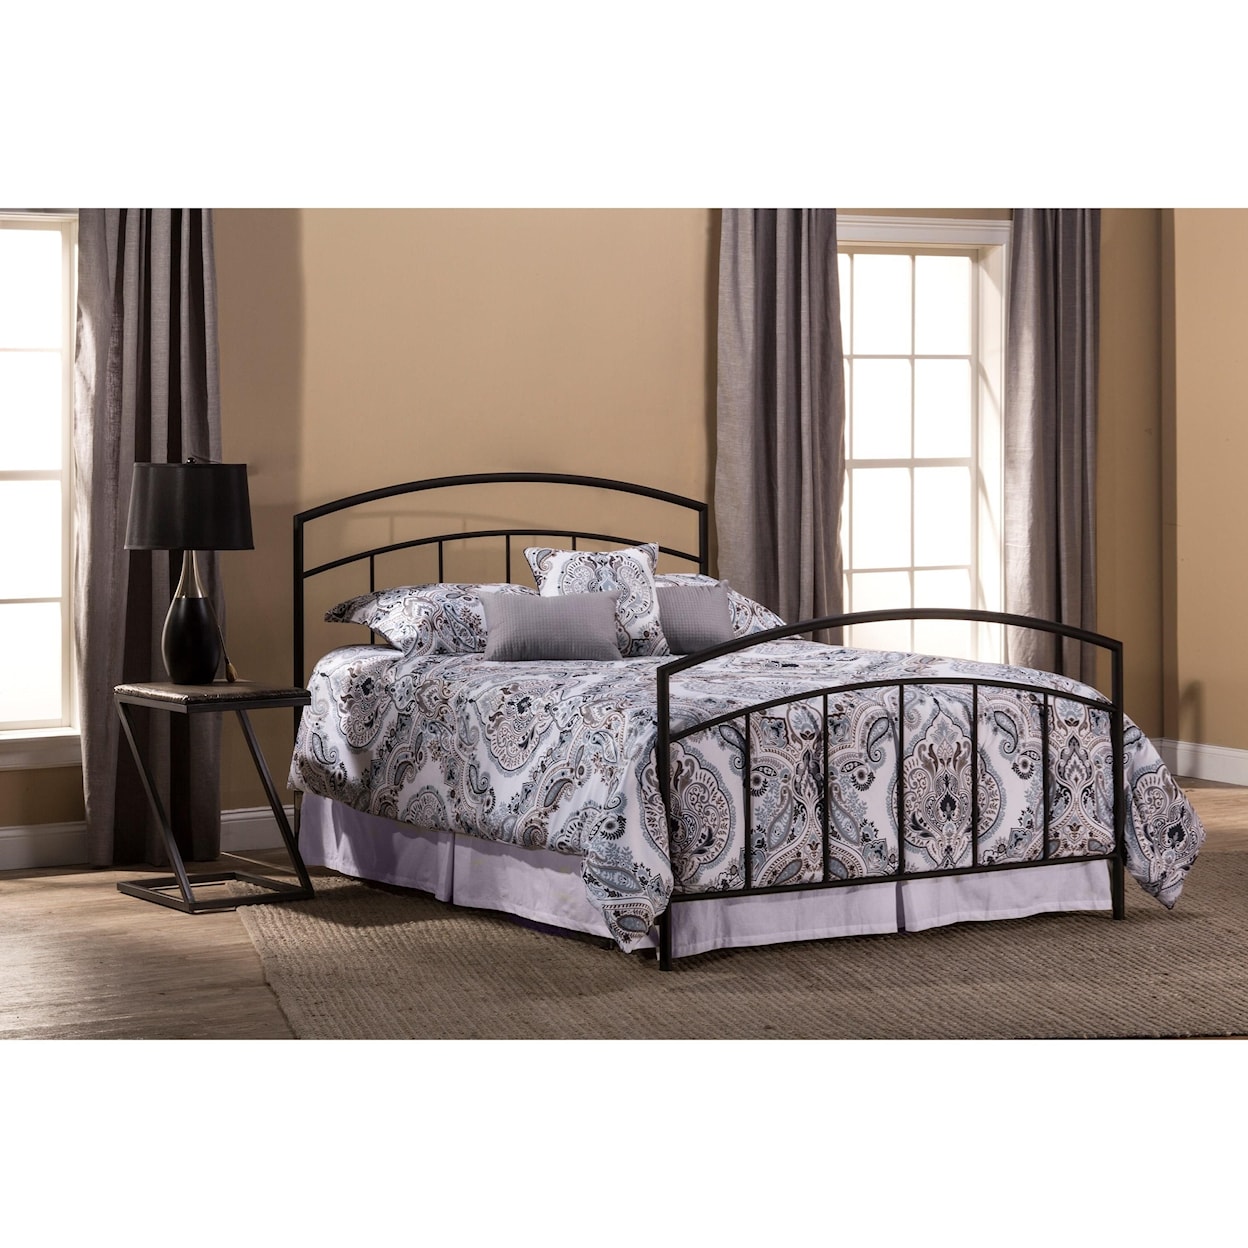 Hillsdale Metal Beds King Bed Set with Rails